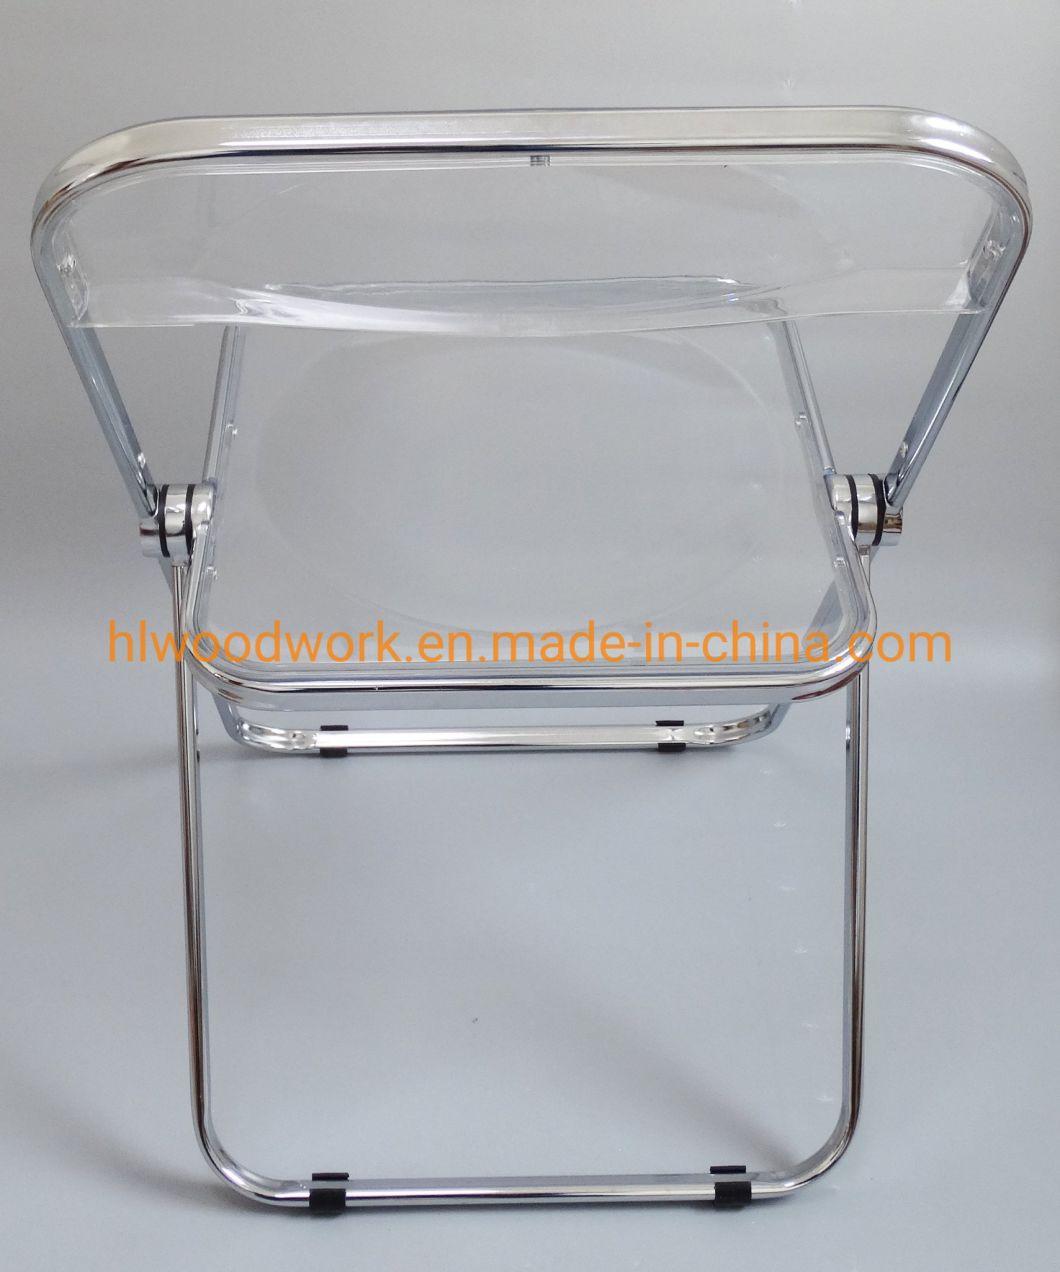 Modern Black Plastic Folded Chair Office/Bar/Dining/Leisure/Banquet/Wedding/Meeting Chair in Chrome Frame Transparent Clear PC Plastic Dining Chair